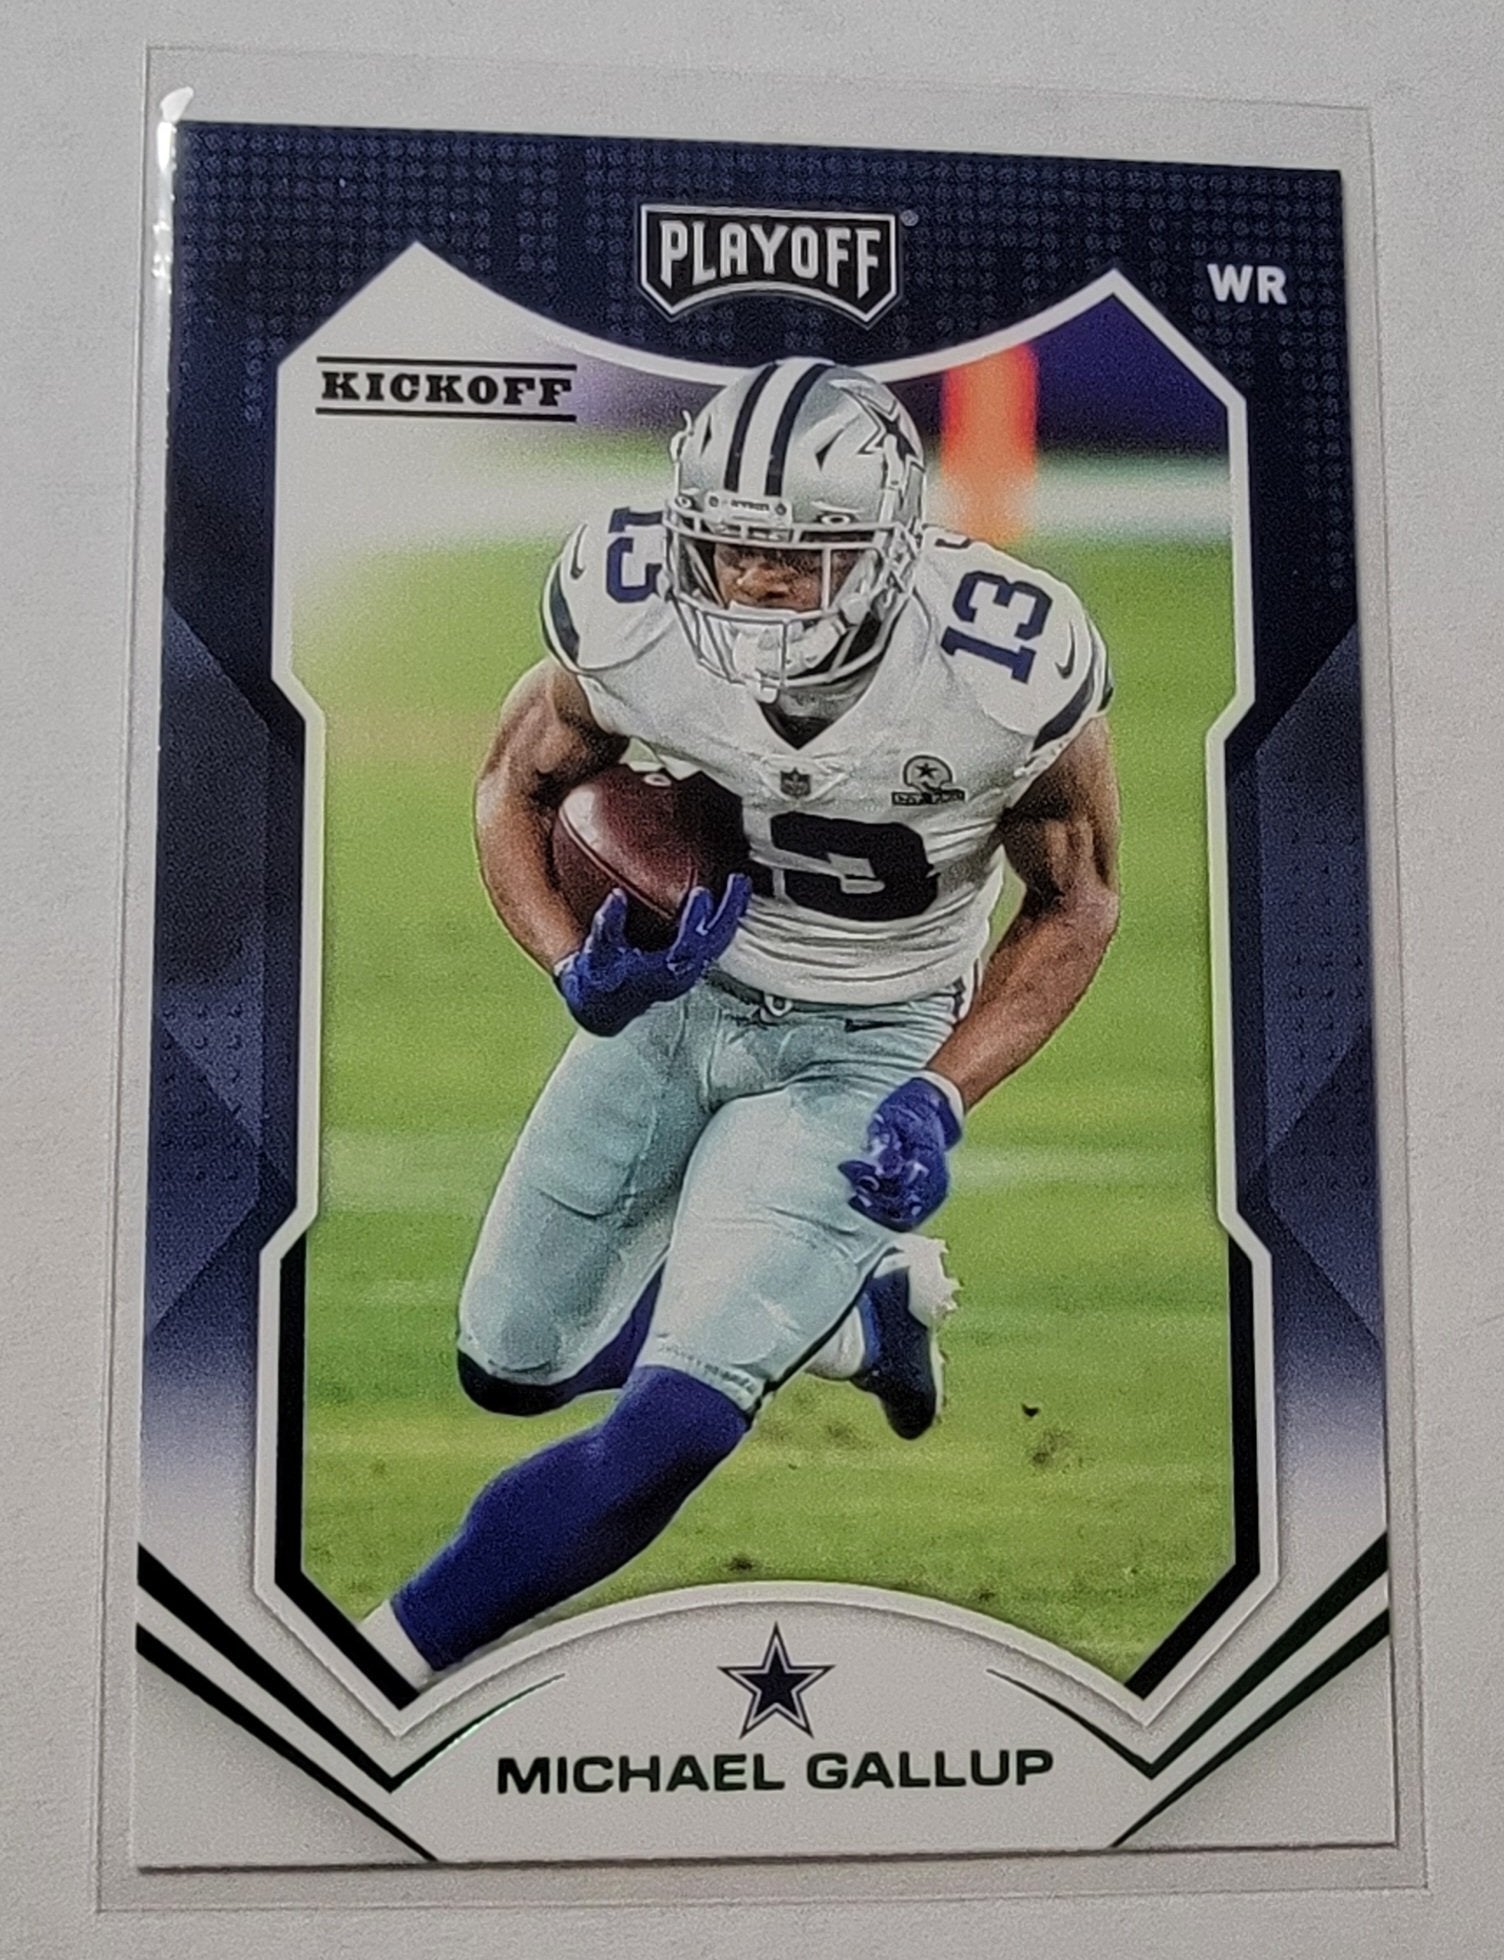 2021 Panini Playoff Michael Gallup Green Kickoff Insert Football Card AVM1 simple Xclusive Collectibles   